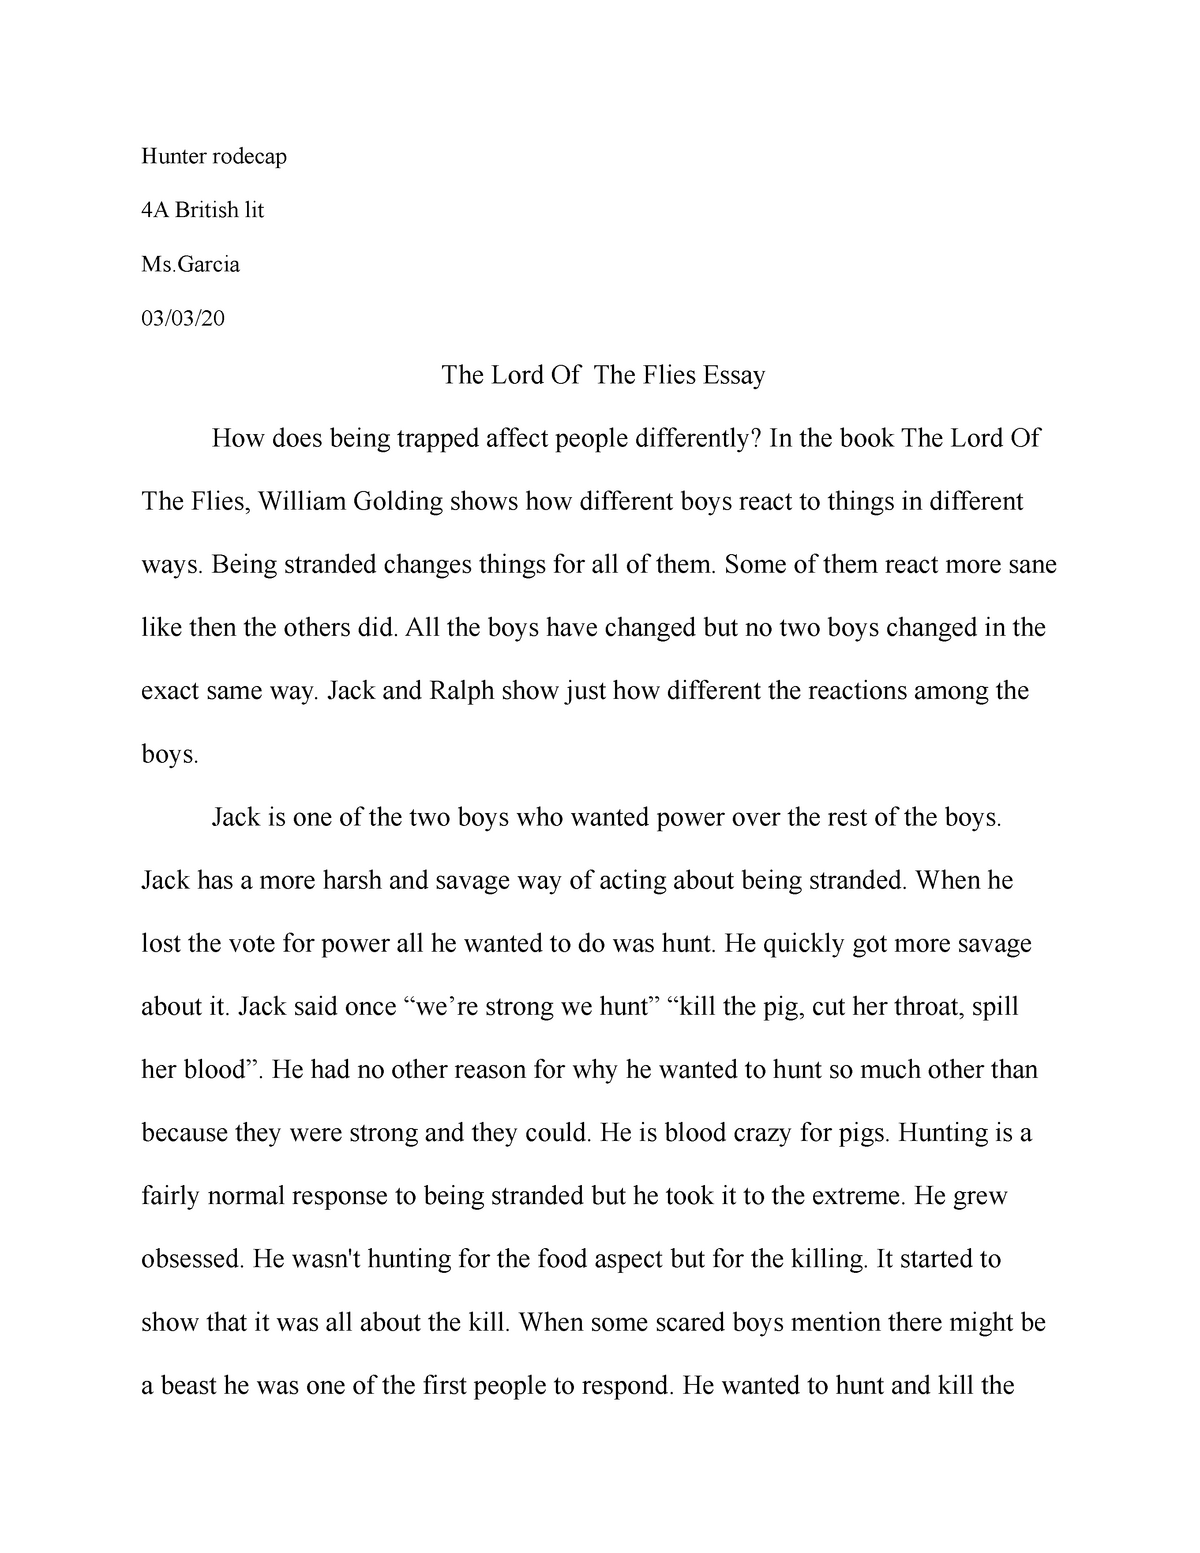 lord of the flies law and order essay